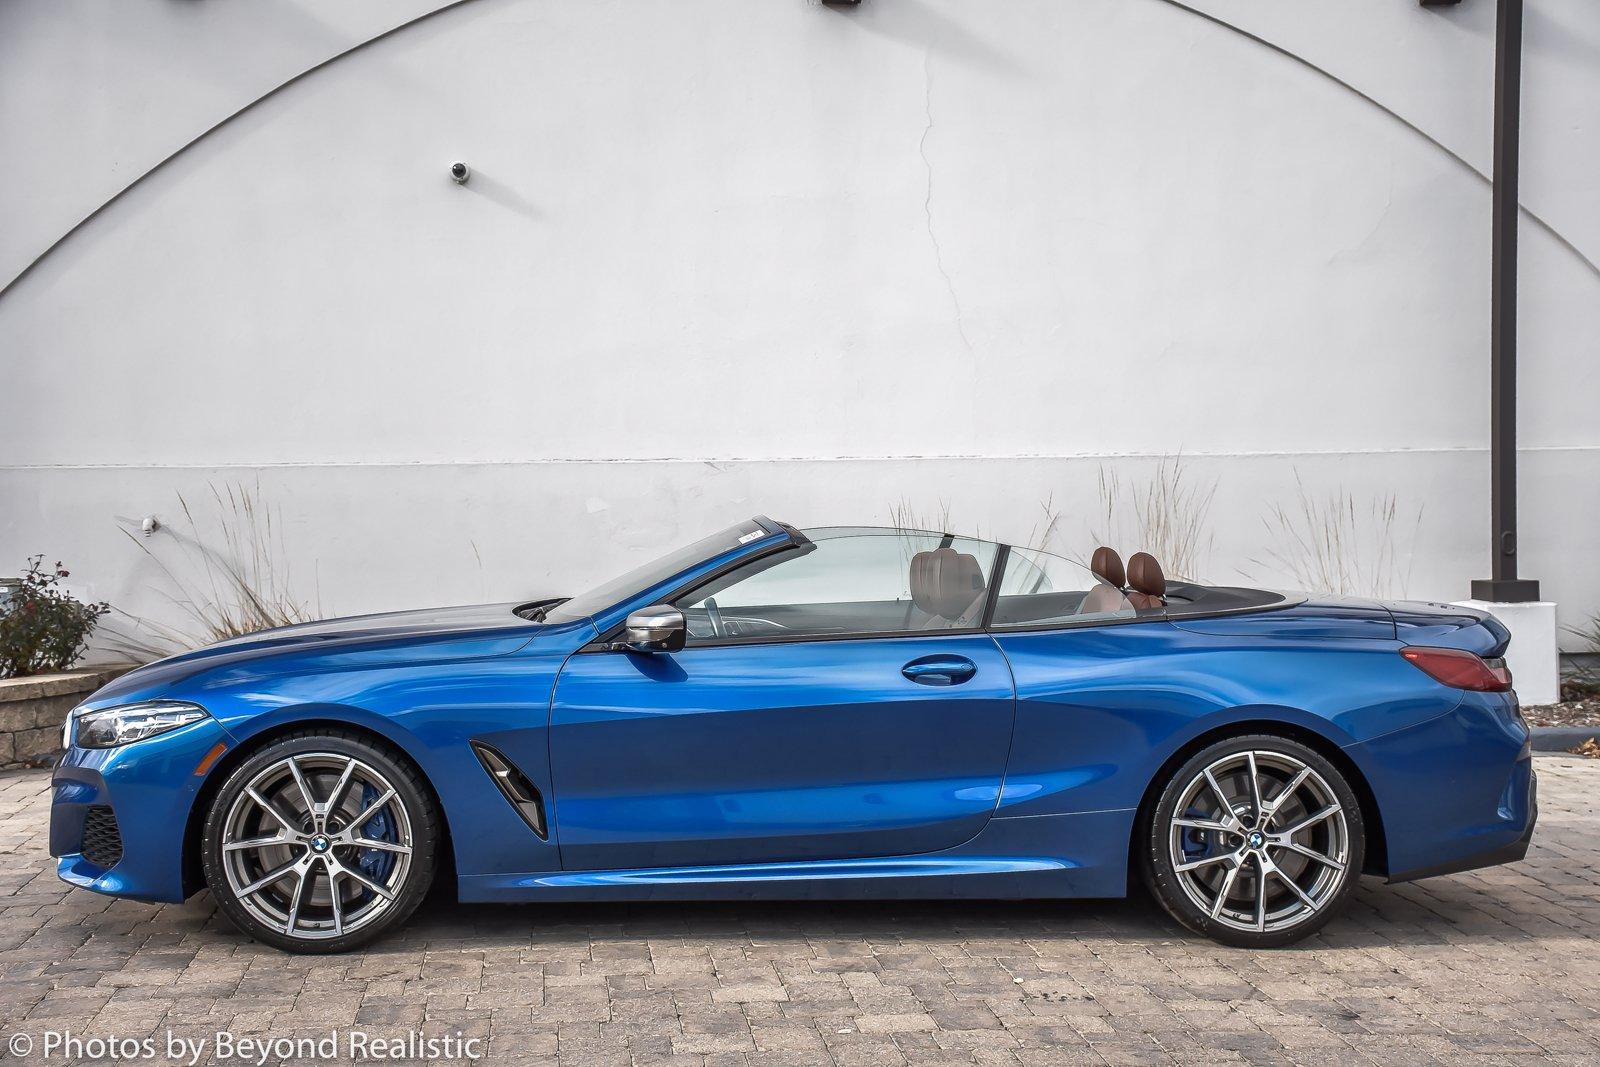 Used 2019 BMW 8 Series M850i xDrive Convertible | Downers Grove, IL